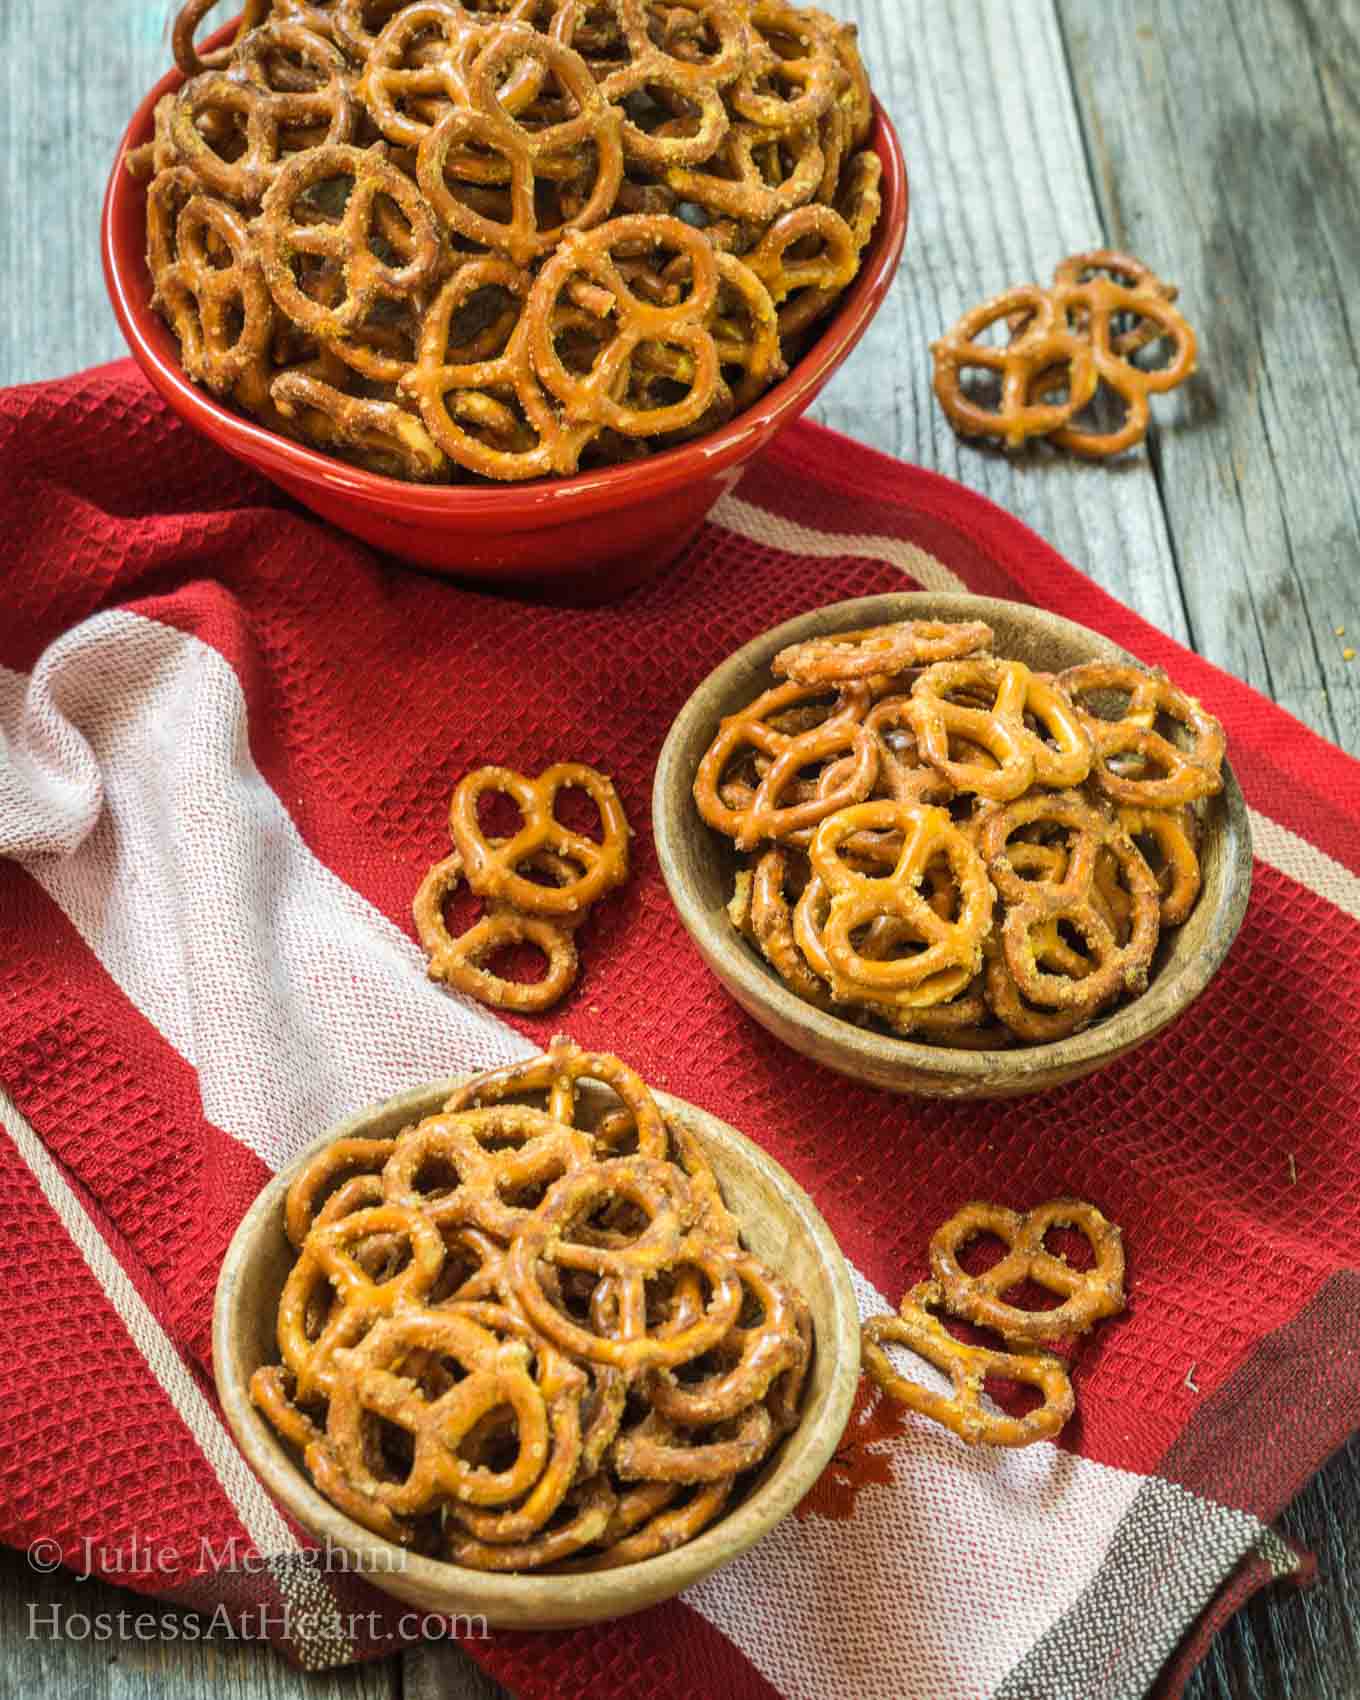 Top-down view of two small wooden bowls and one red bowl filled with pretzels that have been baked in a spicy Nacho Cheese seasoning. Pretzels have been scattered about the bowls.